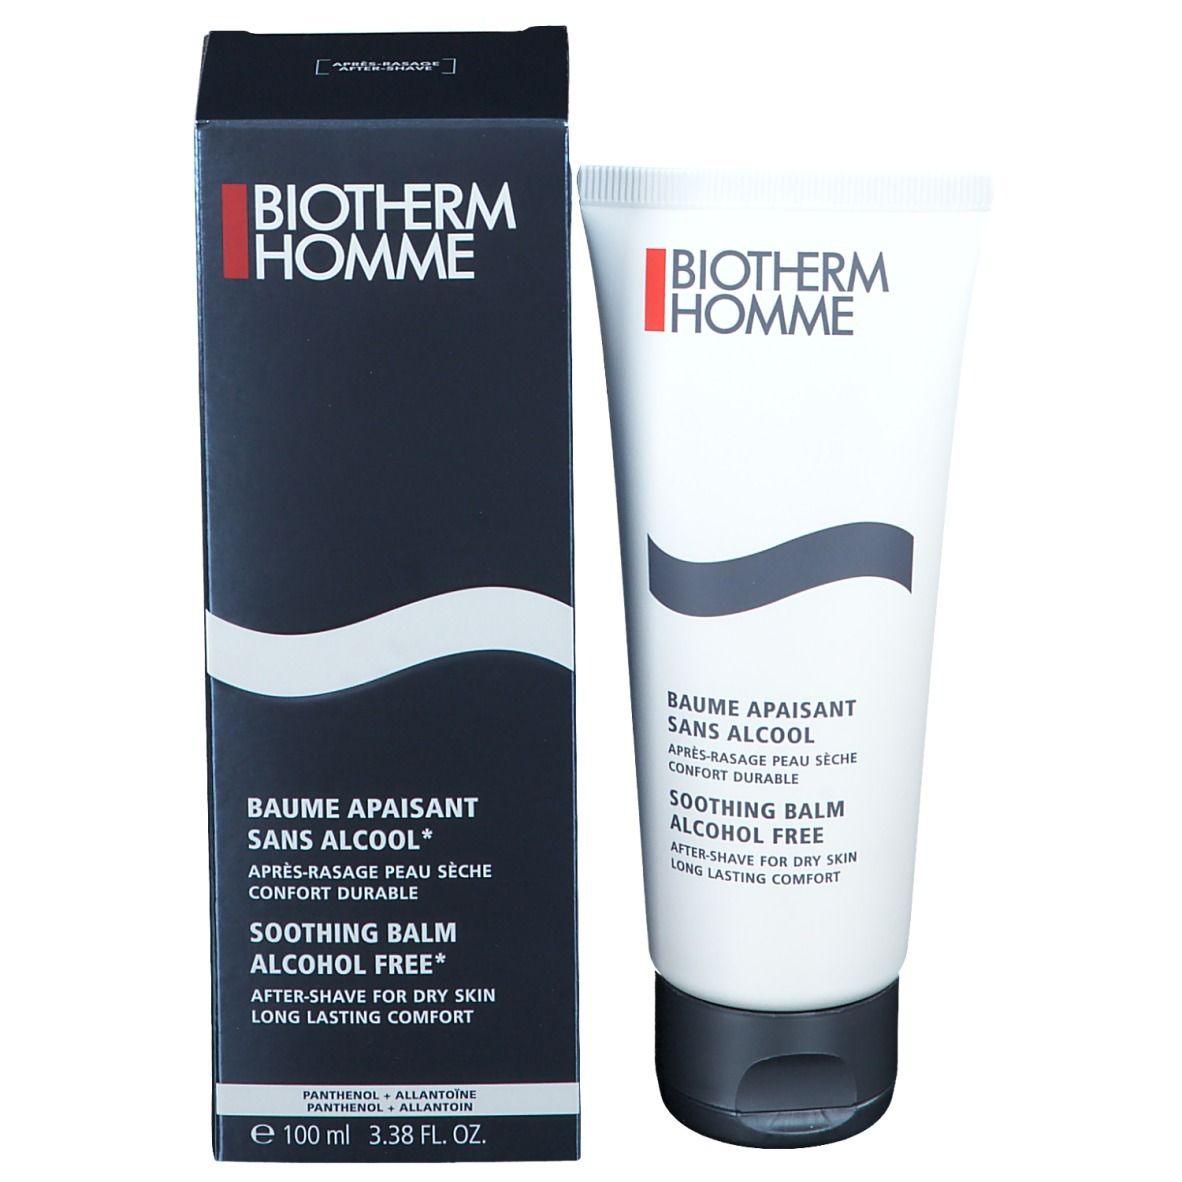 BIOTHERM HOMME Baume Apaisant